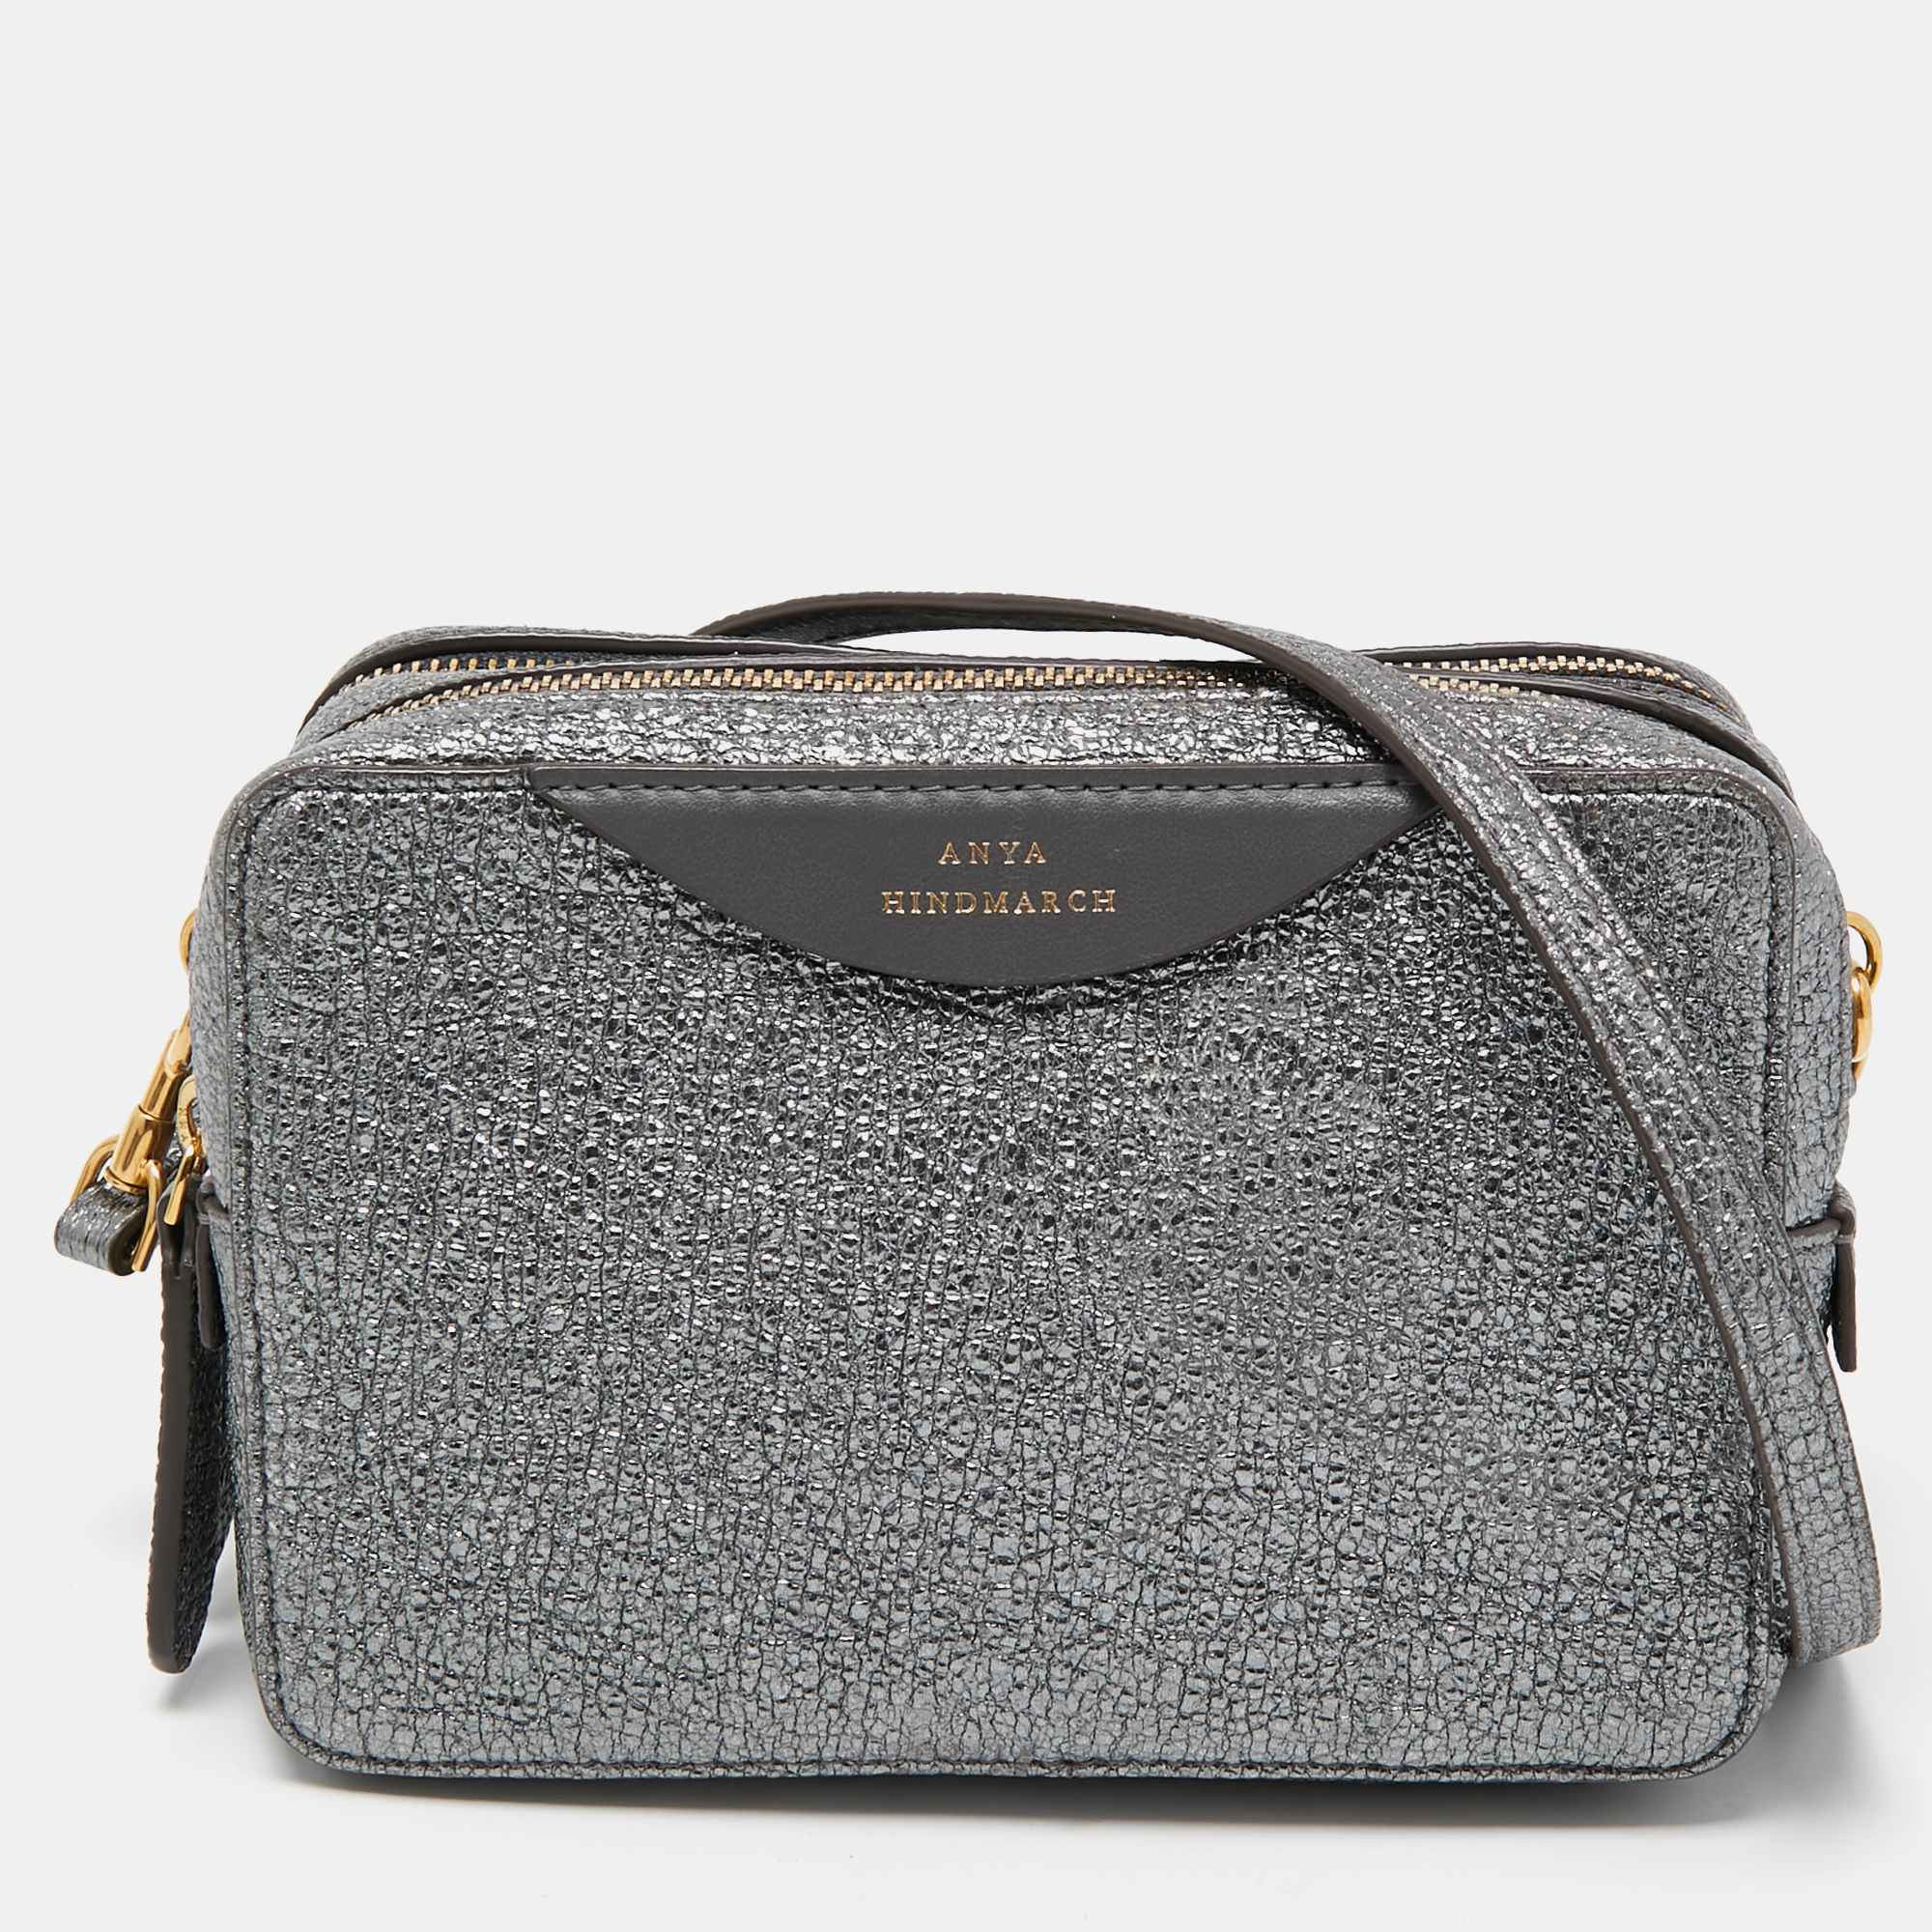 Express your personal style with this high end crossbody bag. Crafted from quality materials it has been added with fine details and is finished perfectly. It features a well sized interior.